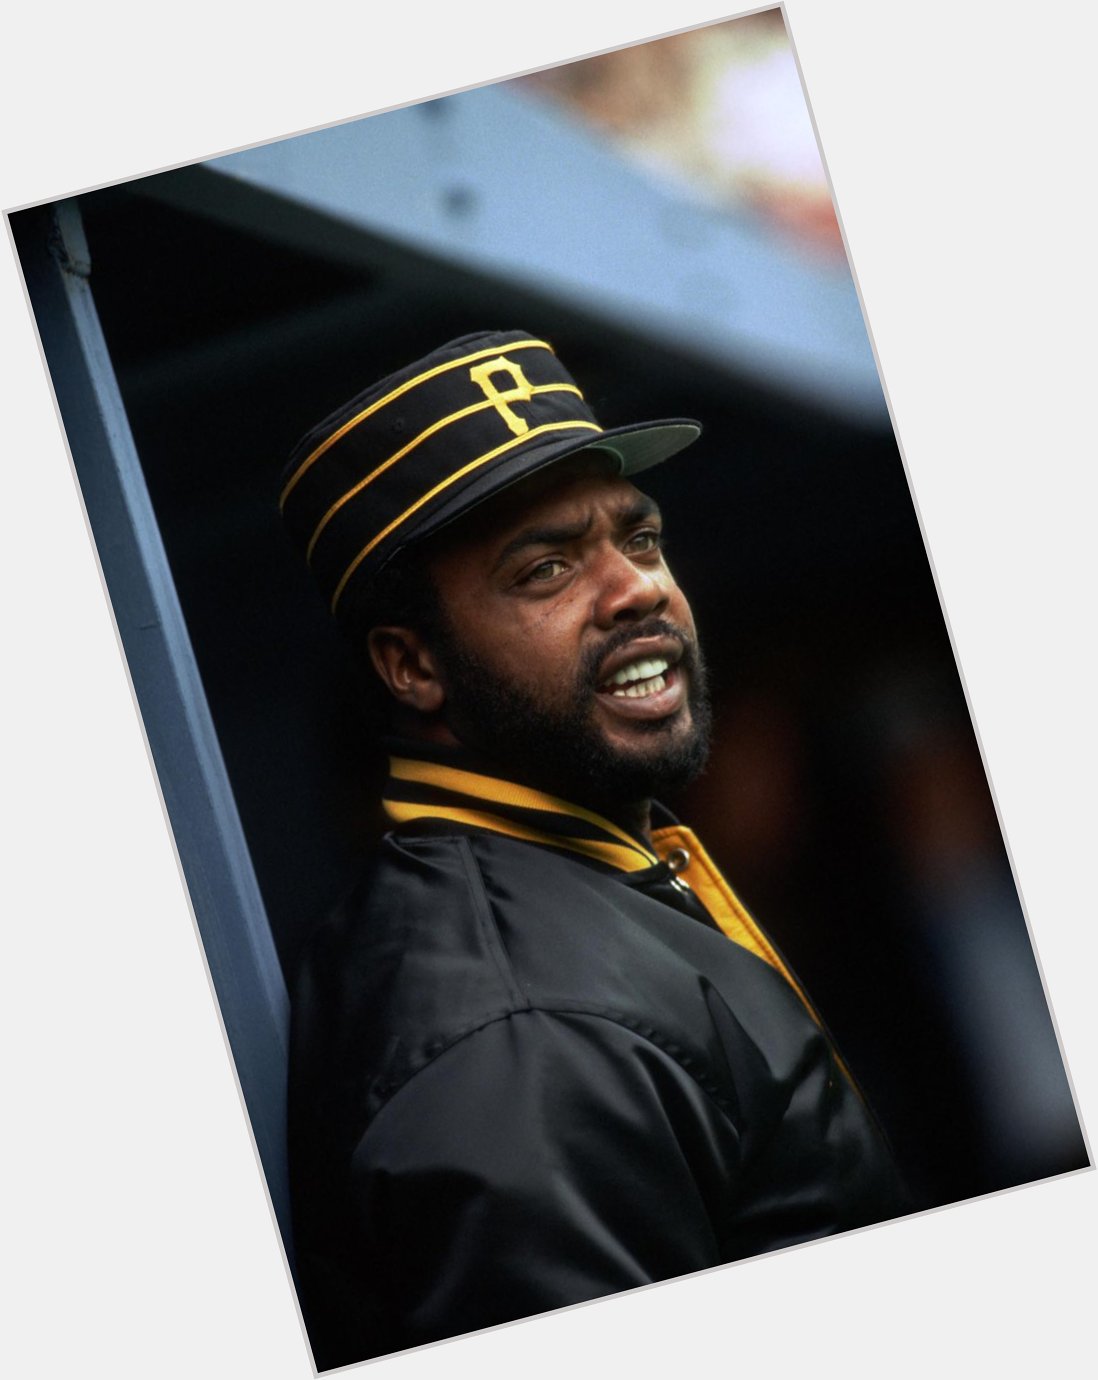 Happy birthday to 1978 MVP Dave Parker. Dave is a 3 time Gold Glove winner, 7 time all star, and 2 time batting champ 